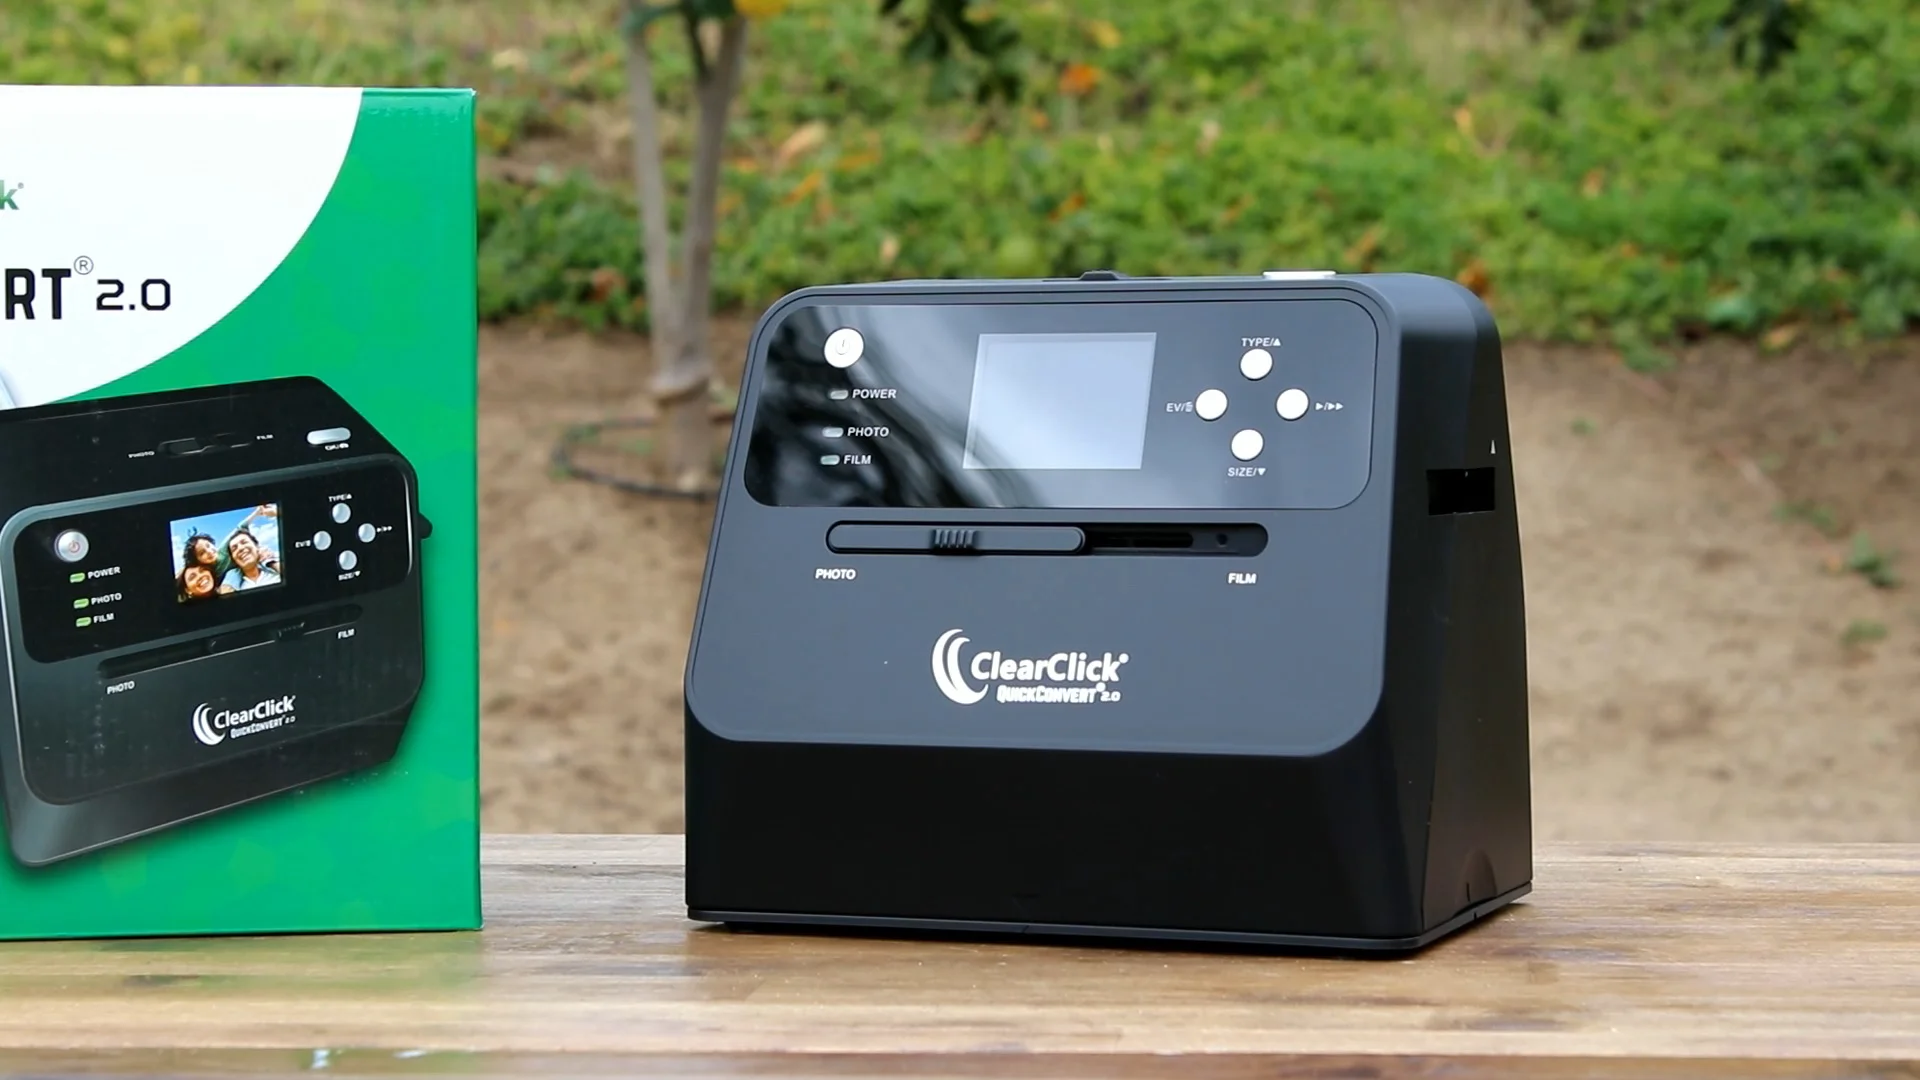 ClearClick QuickConvert 2.0 - Photo, Slide, and Negative Scanner on Vimeo